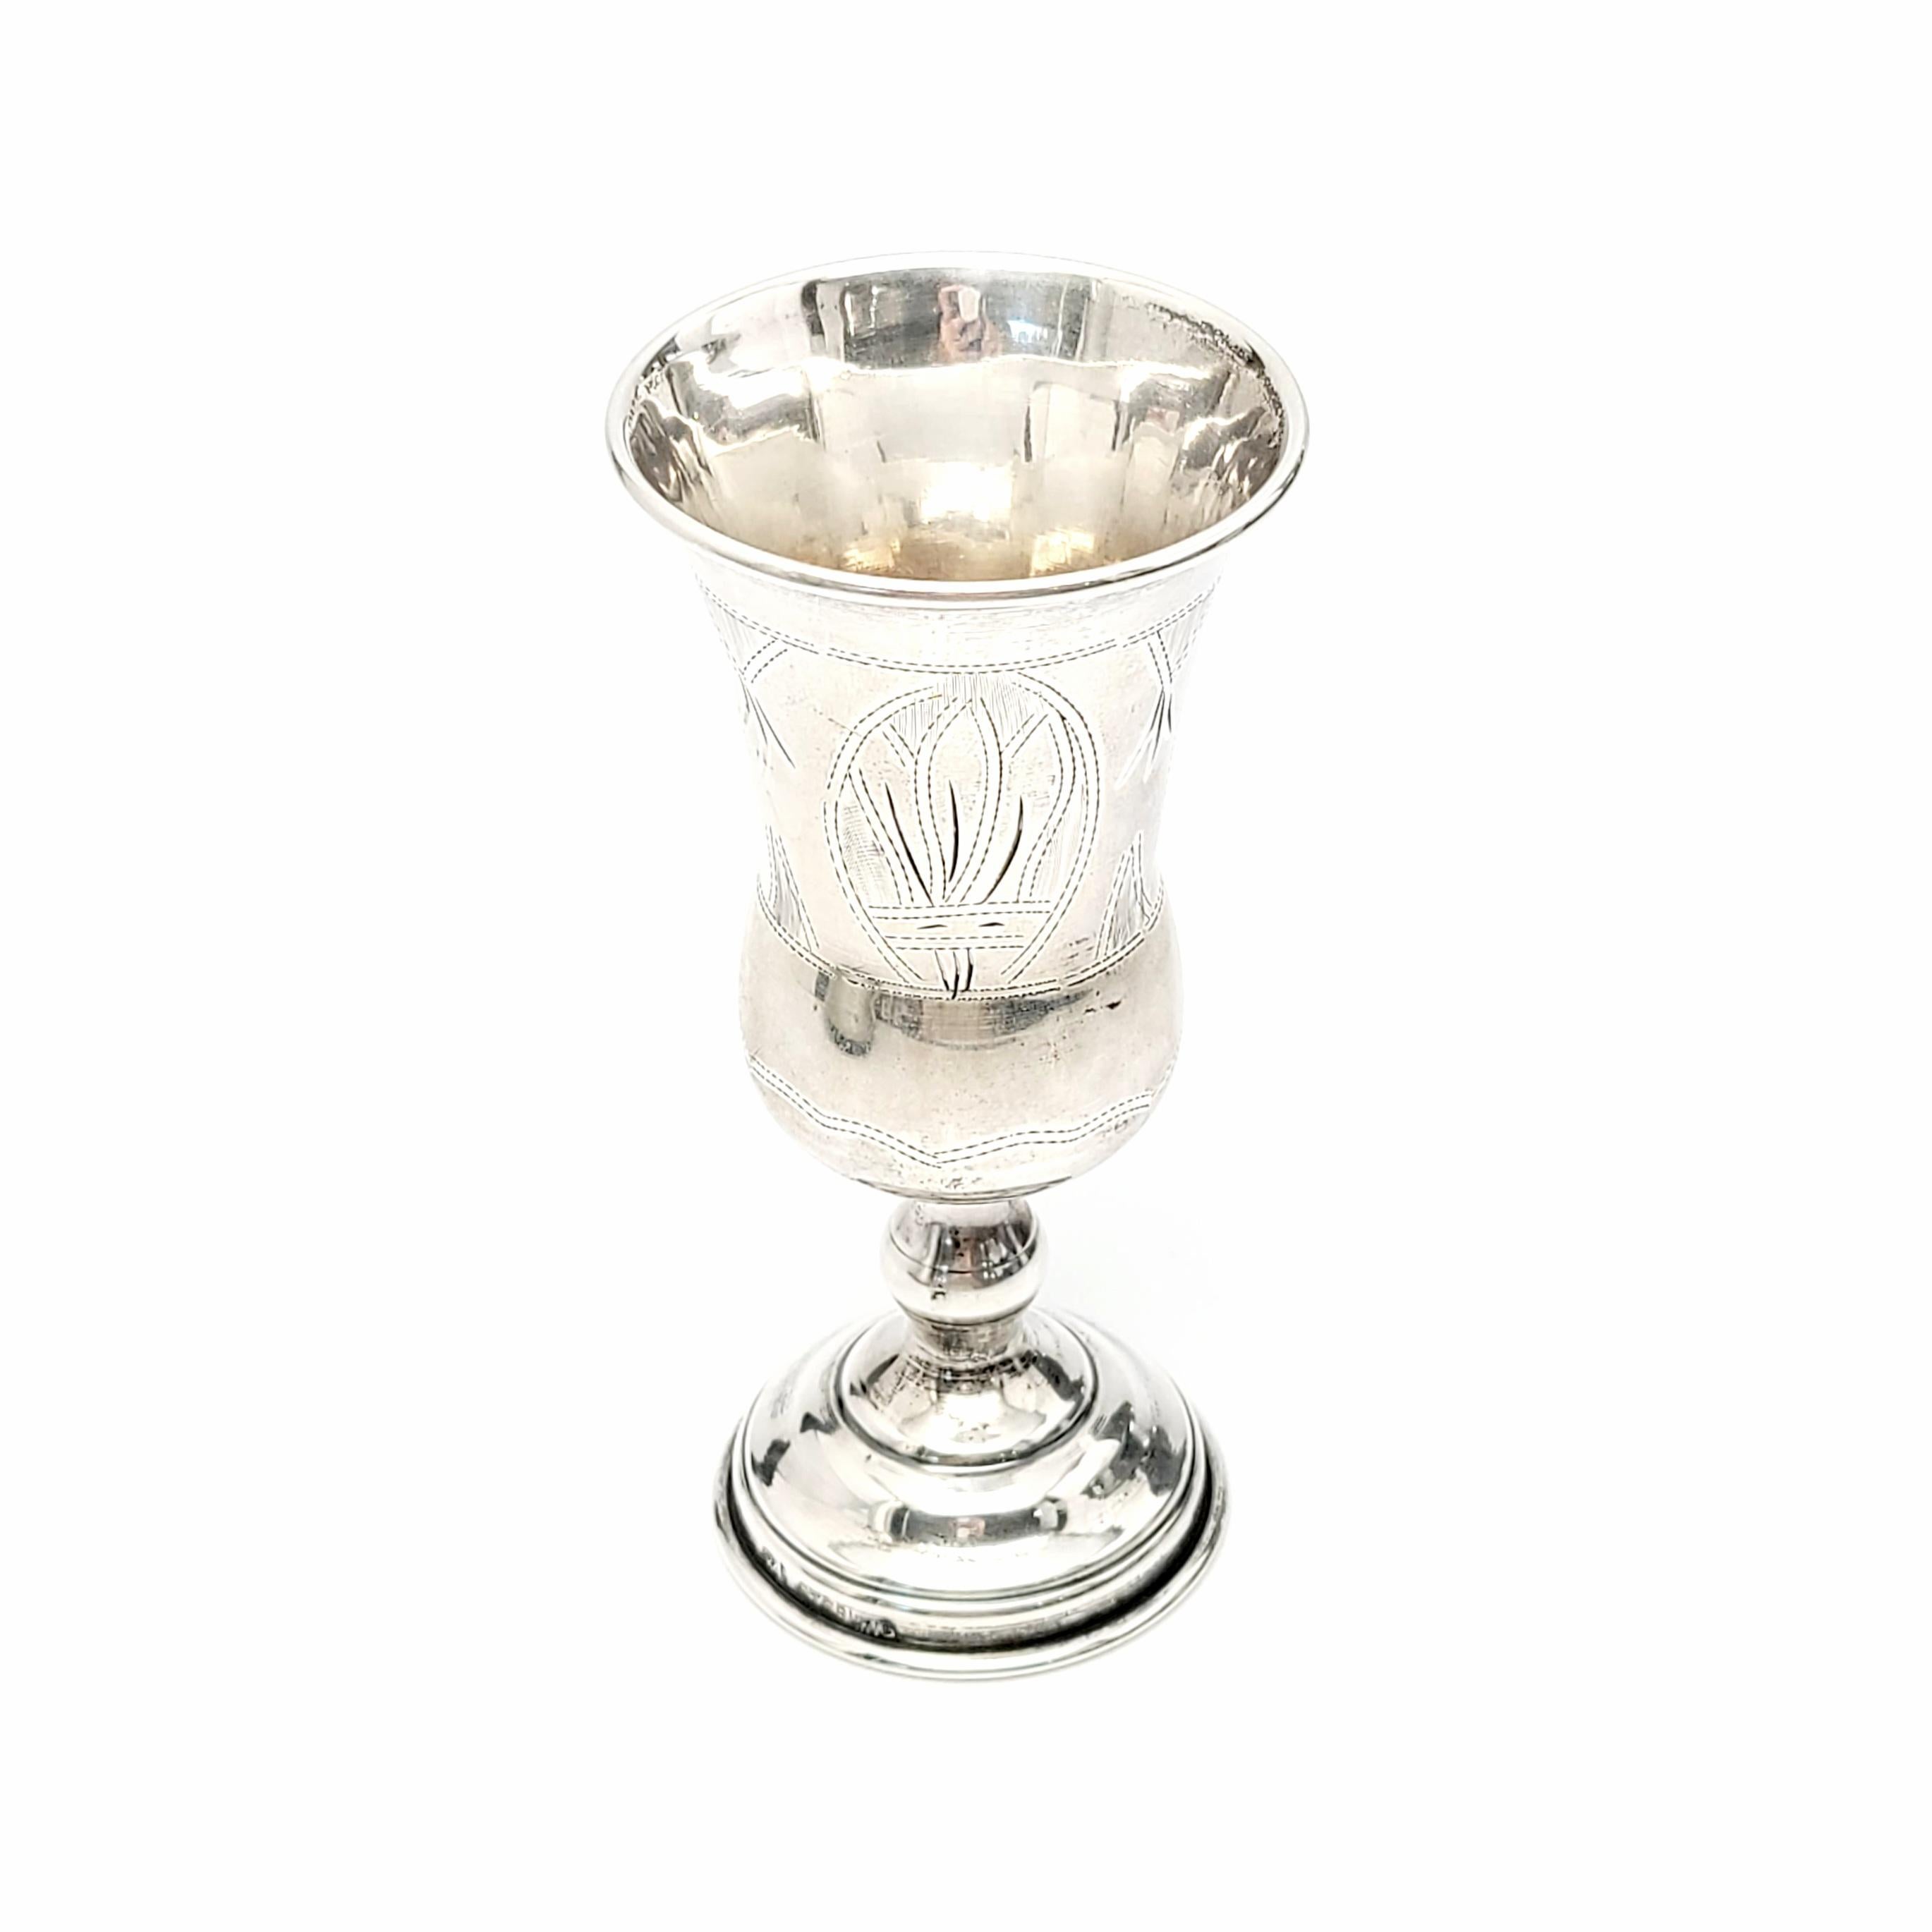 Vintage sterling silver vodka or Kiddush cup.

Beautiful bright cut etched design on 3 panels around the cup. Panels alternate between floral wheat-like designs and a Star of David and engraving. Engraving appears to be M.Y. and J.P.Y